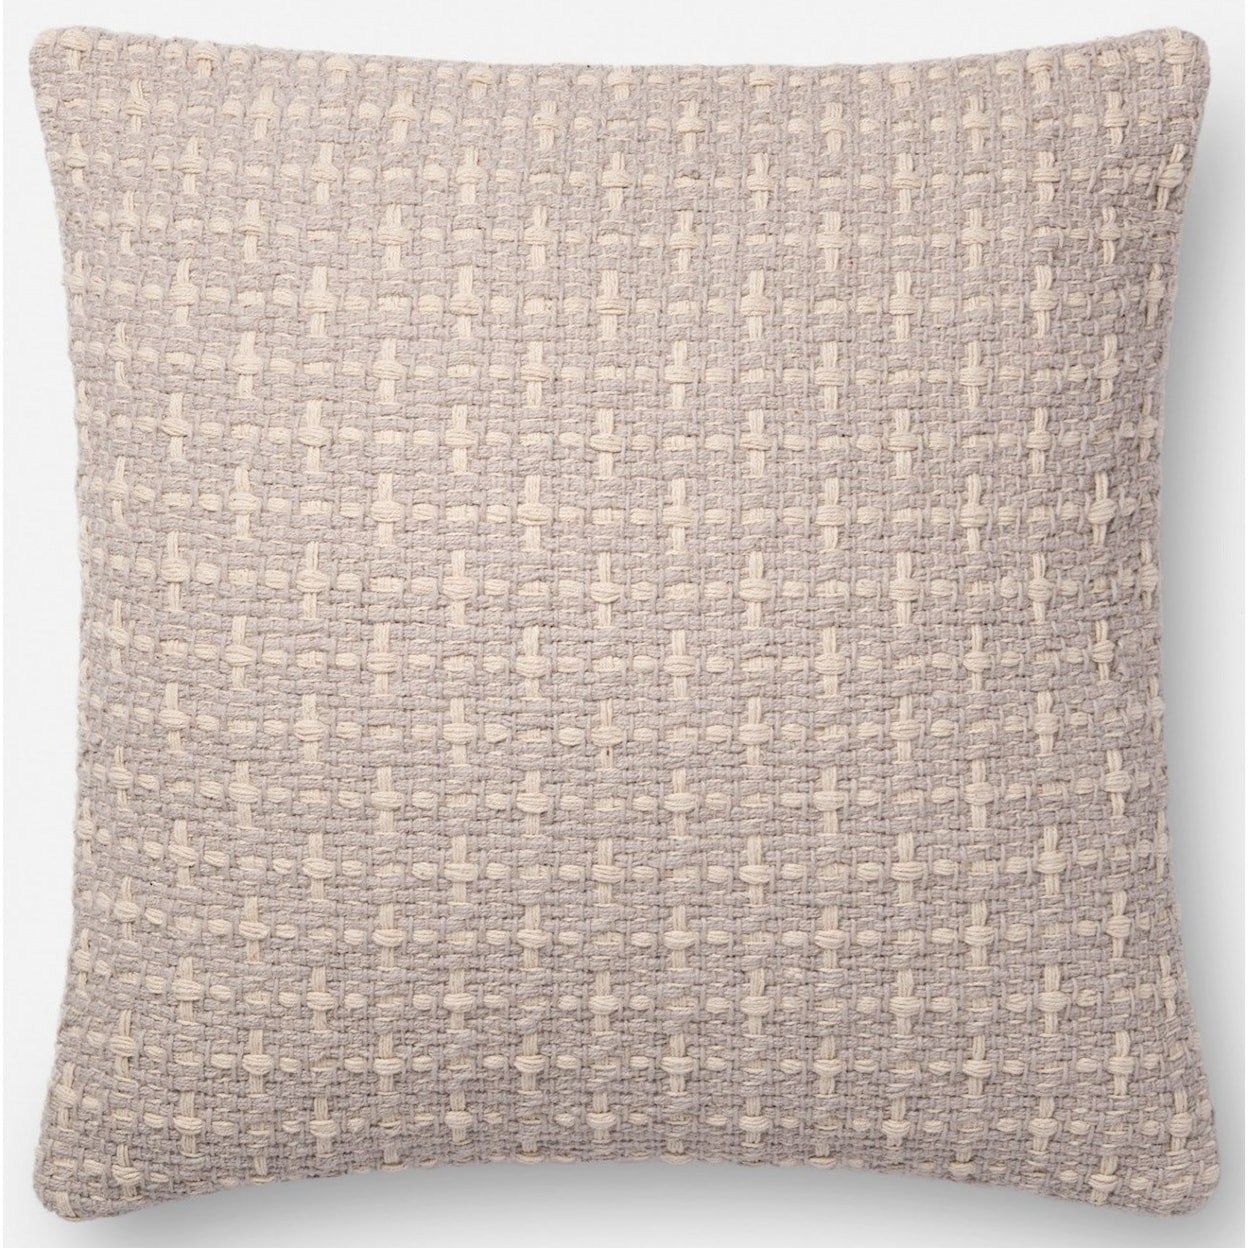 Magnolia Home by Joanna Gaines for Loloi Accent Pillows 18" x 18" Down Pillow